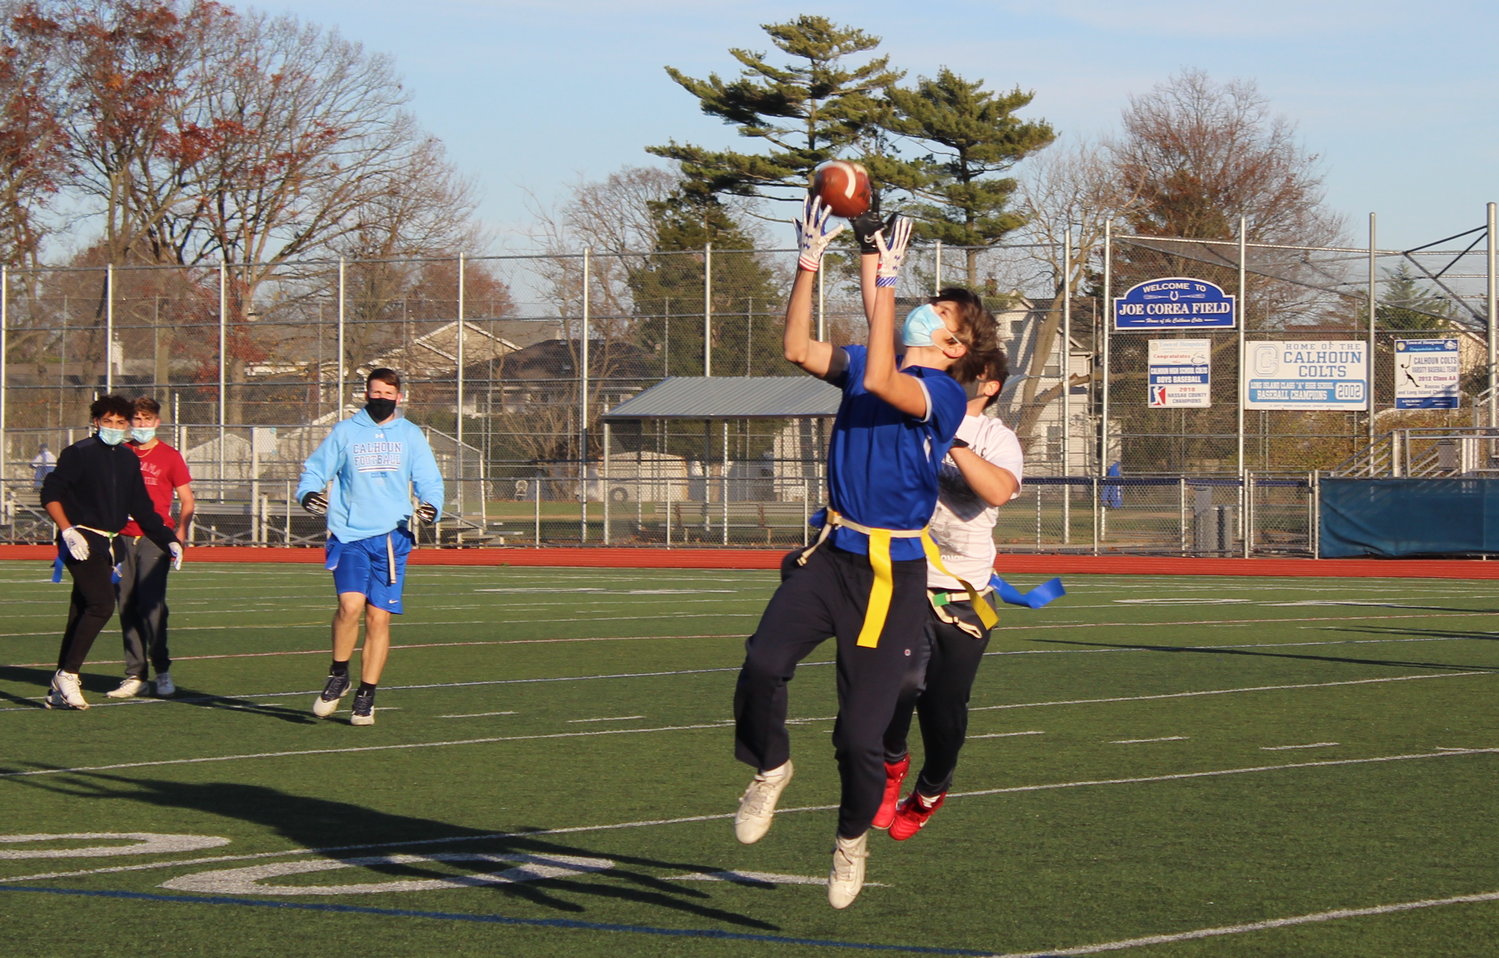 Senior TJ Rogers, the starting wide receiver for Sanford H. Calhoun High School’s football team, leapt to complete a pass during a flag football tournament benefiting the Bellmore-Merrick Community Cupboard on Nov. 24.